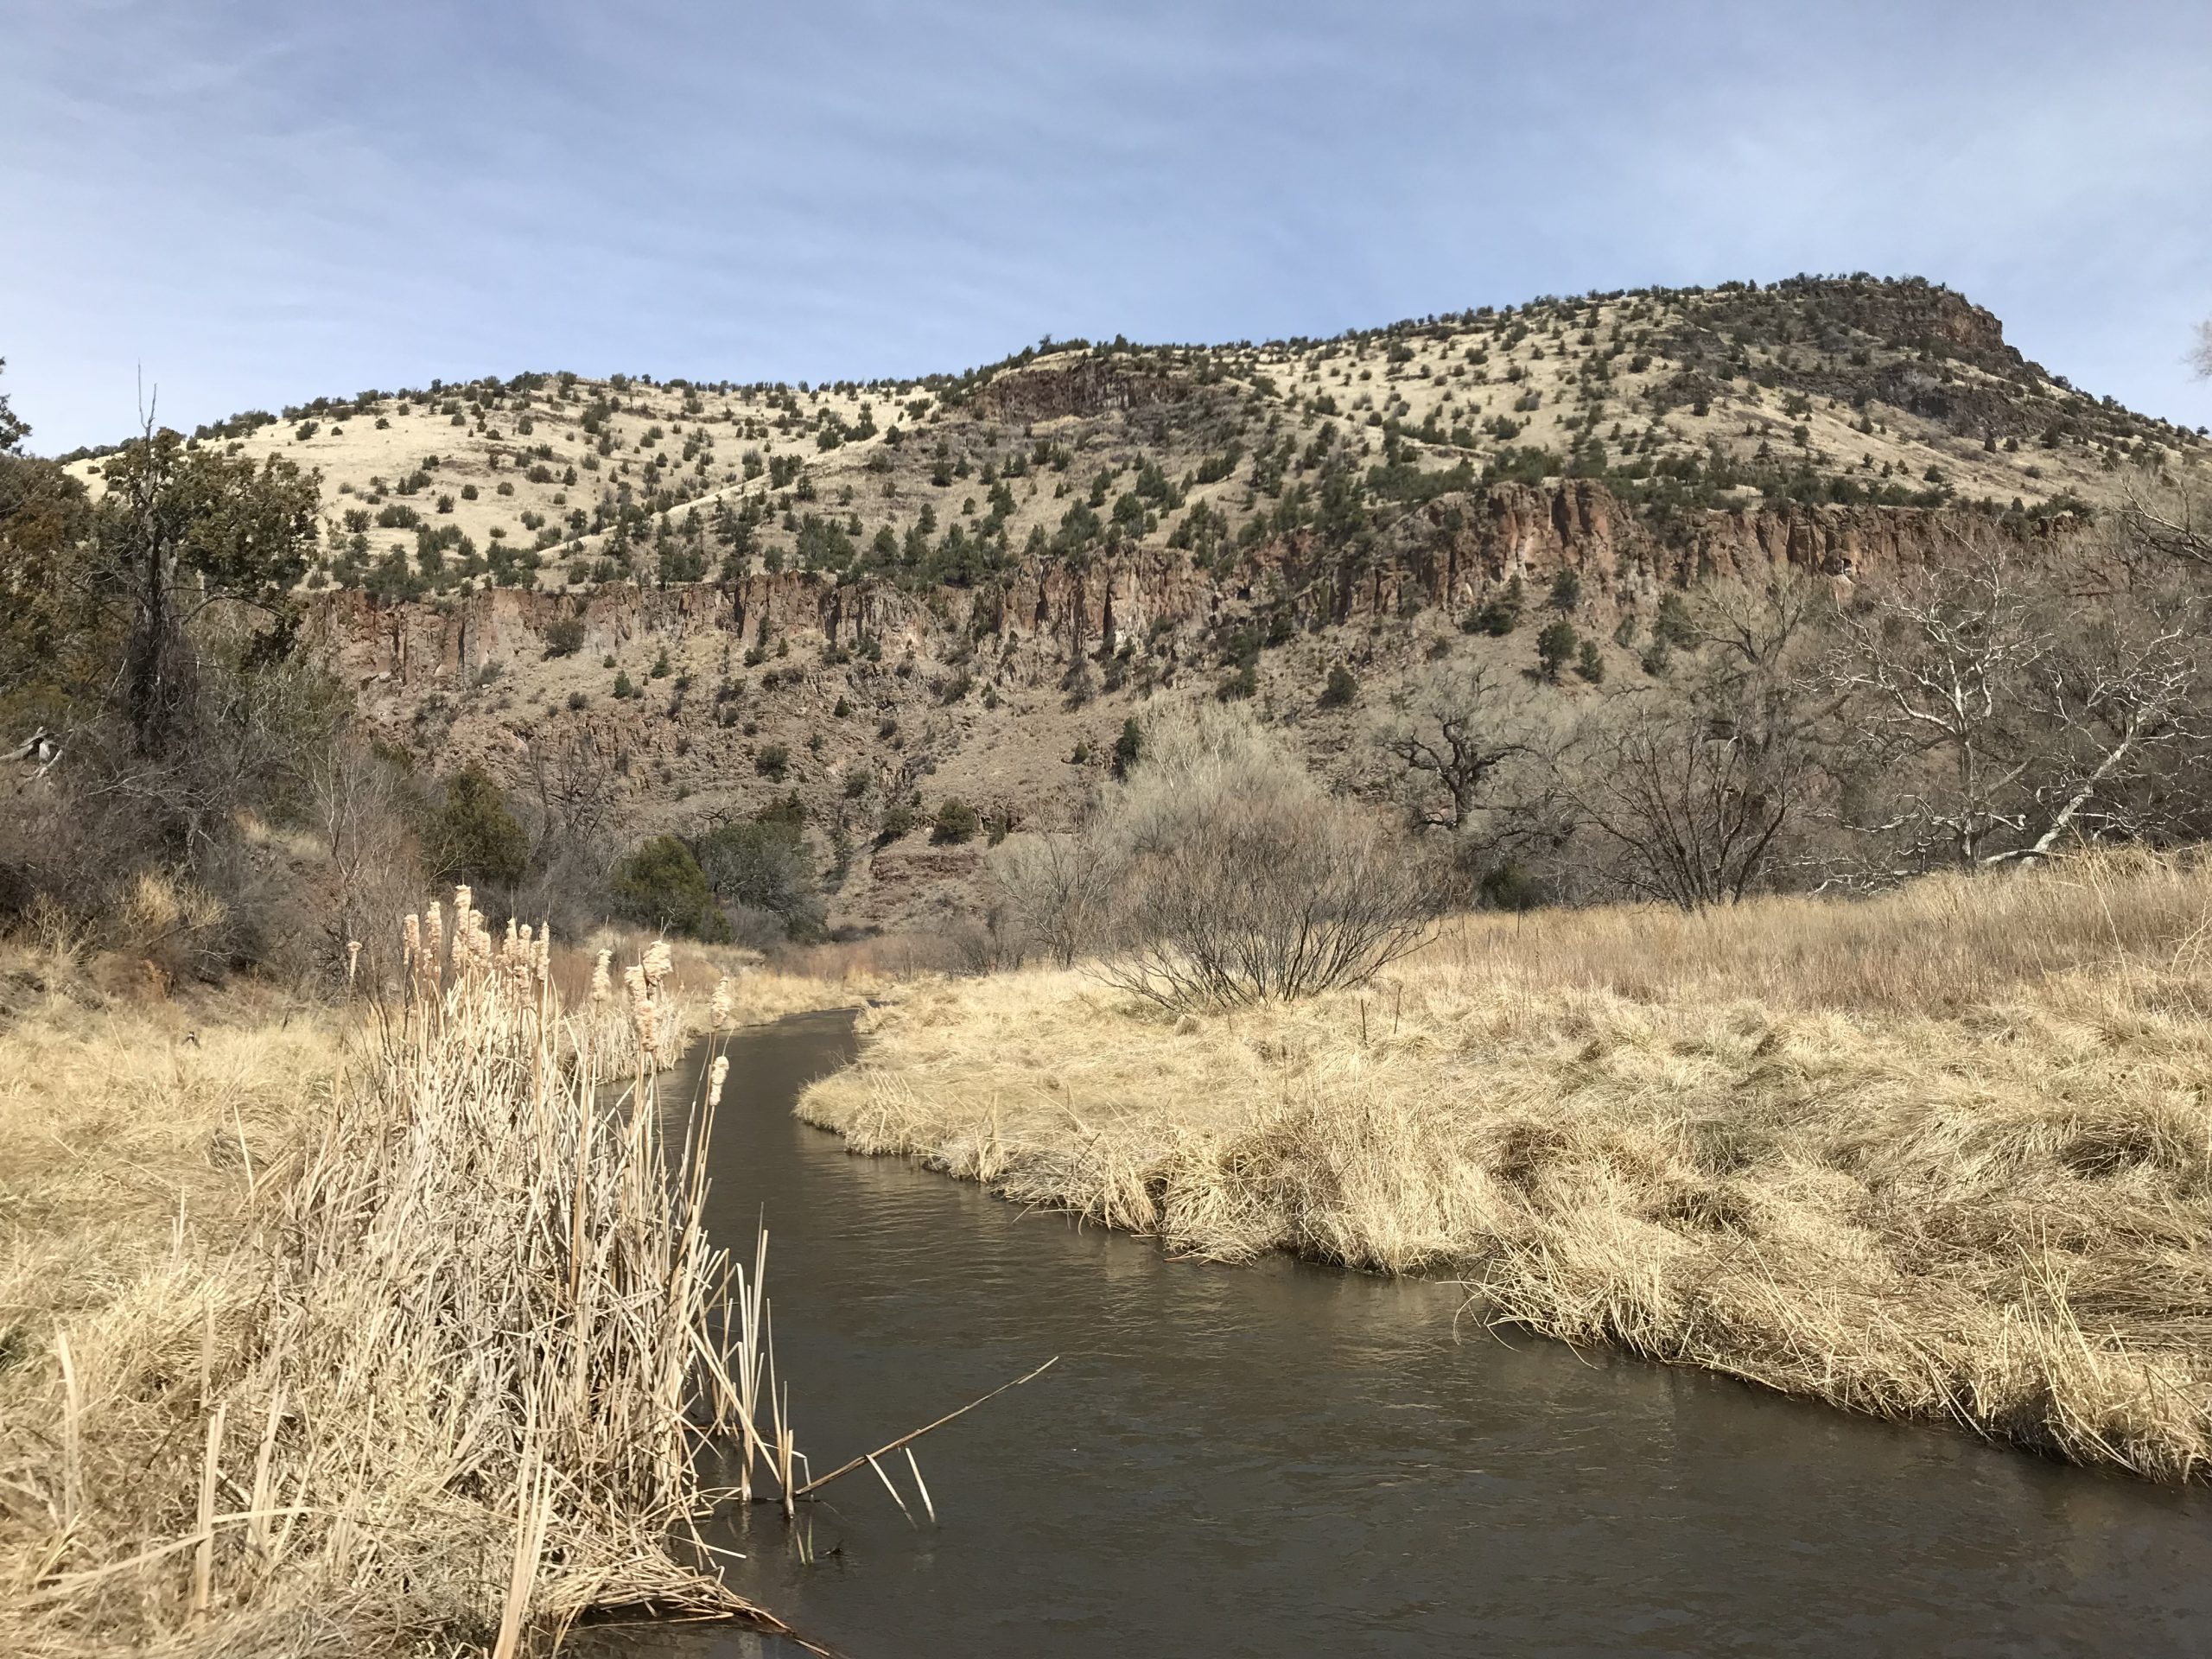 The Gila: river, place, family